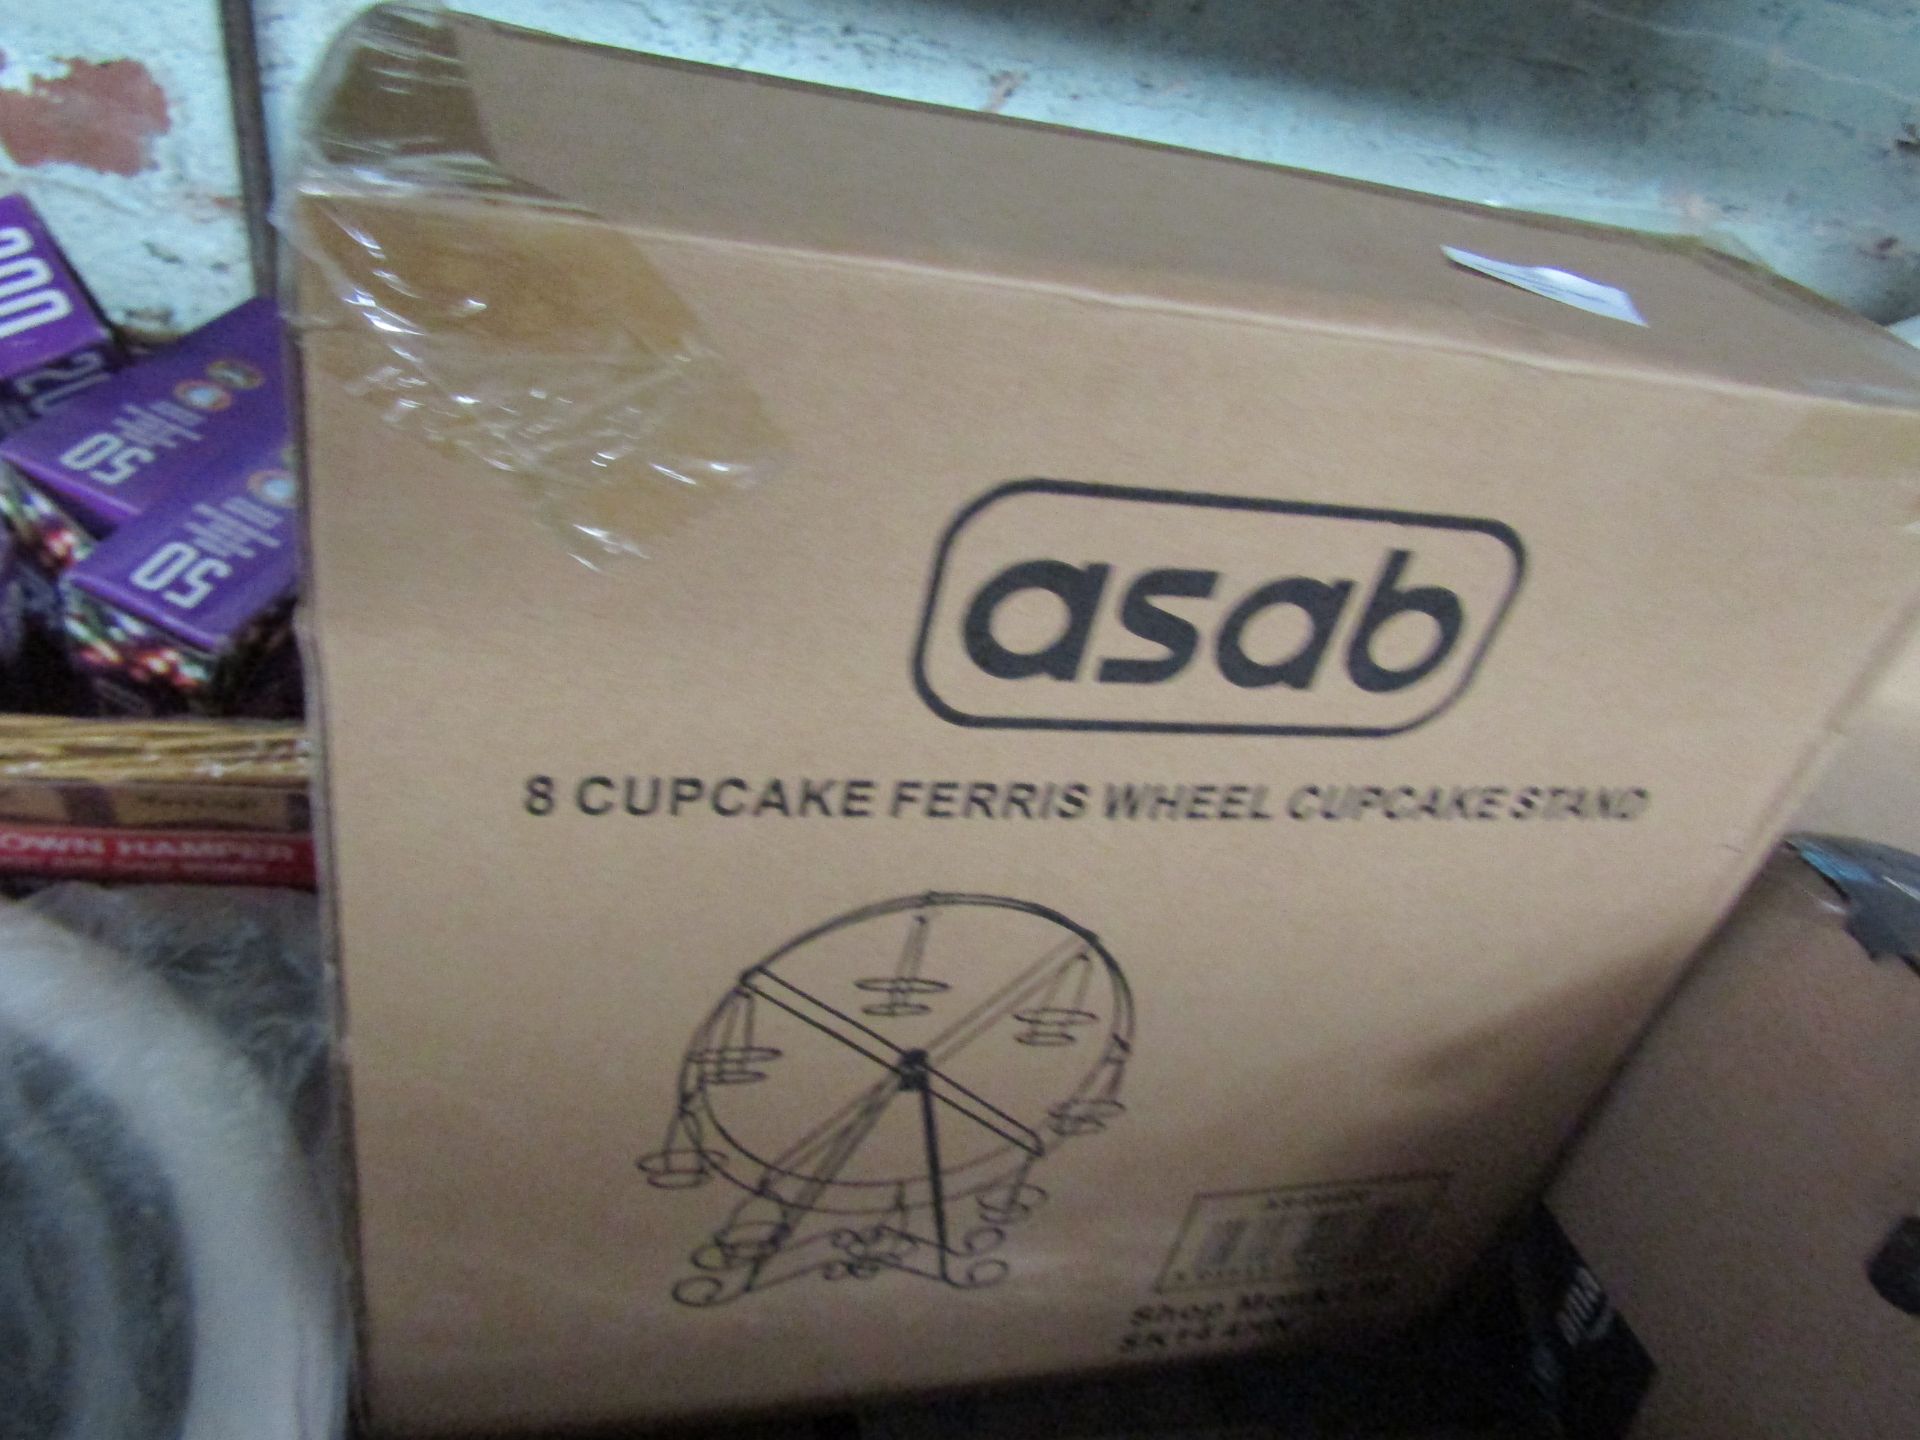 Asab - 8-Cupcake Ferris Wheel Stand - Unchecked & Boxed.